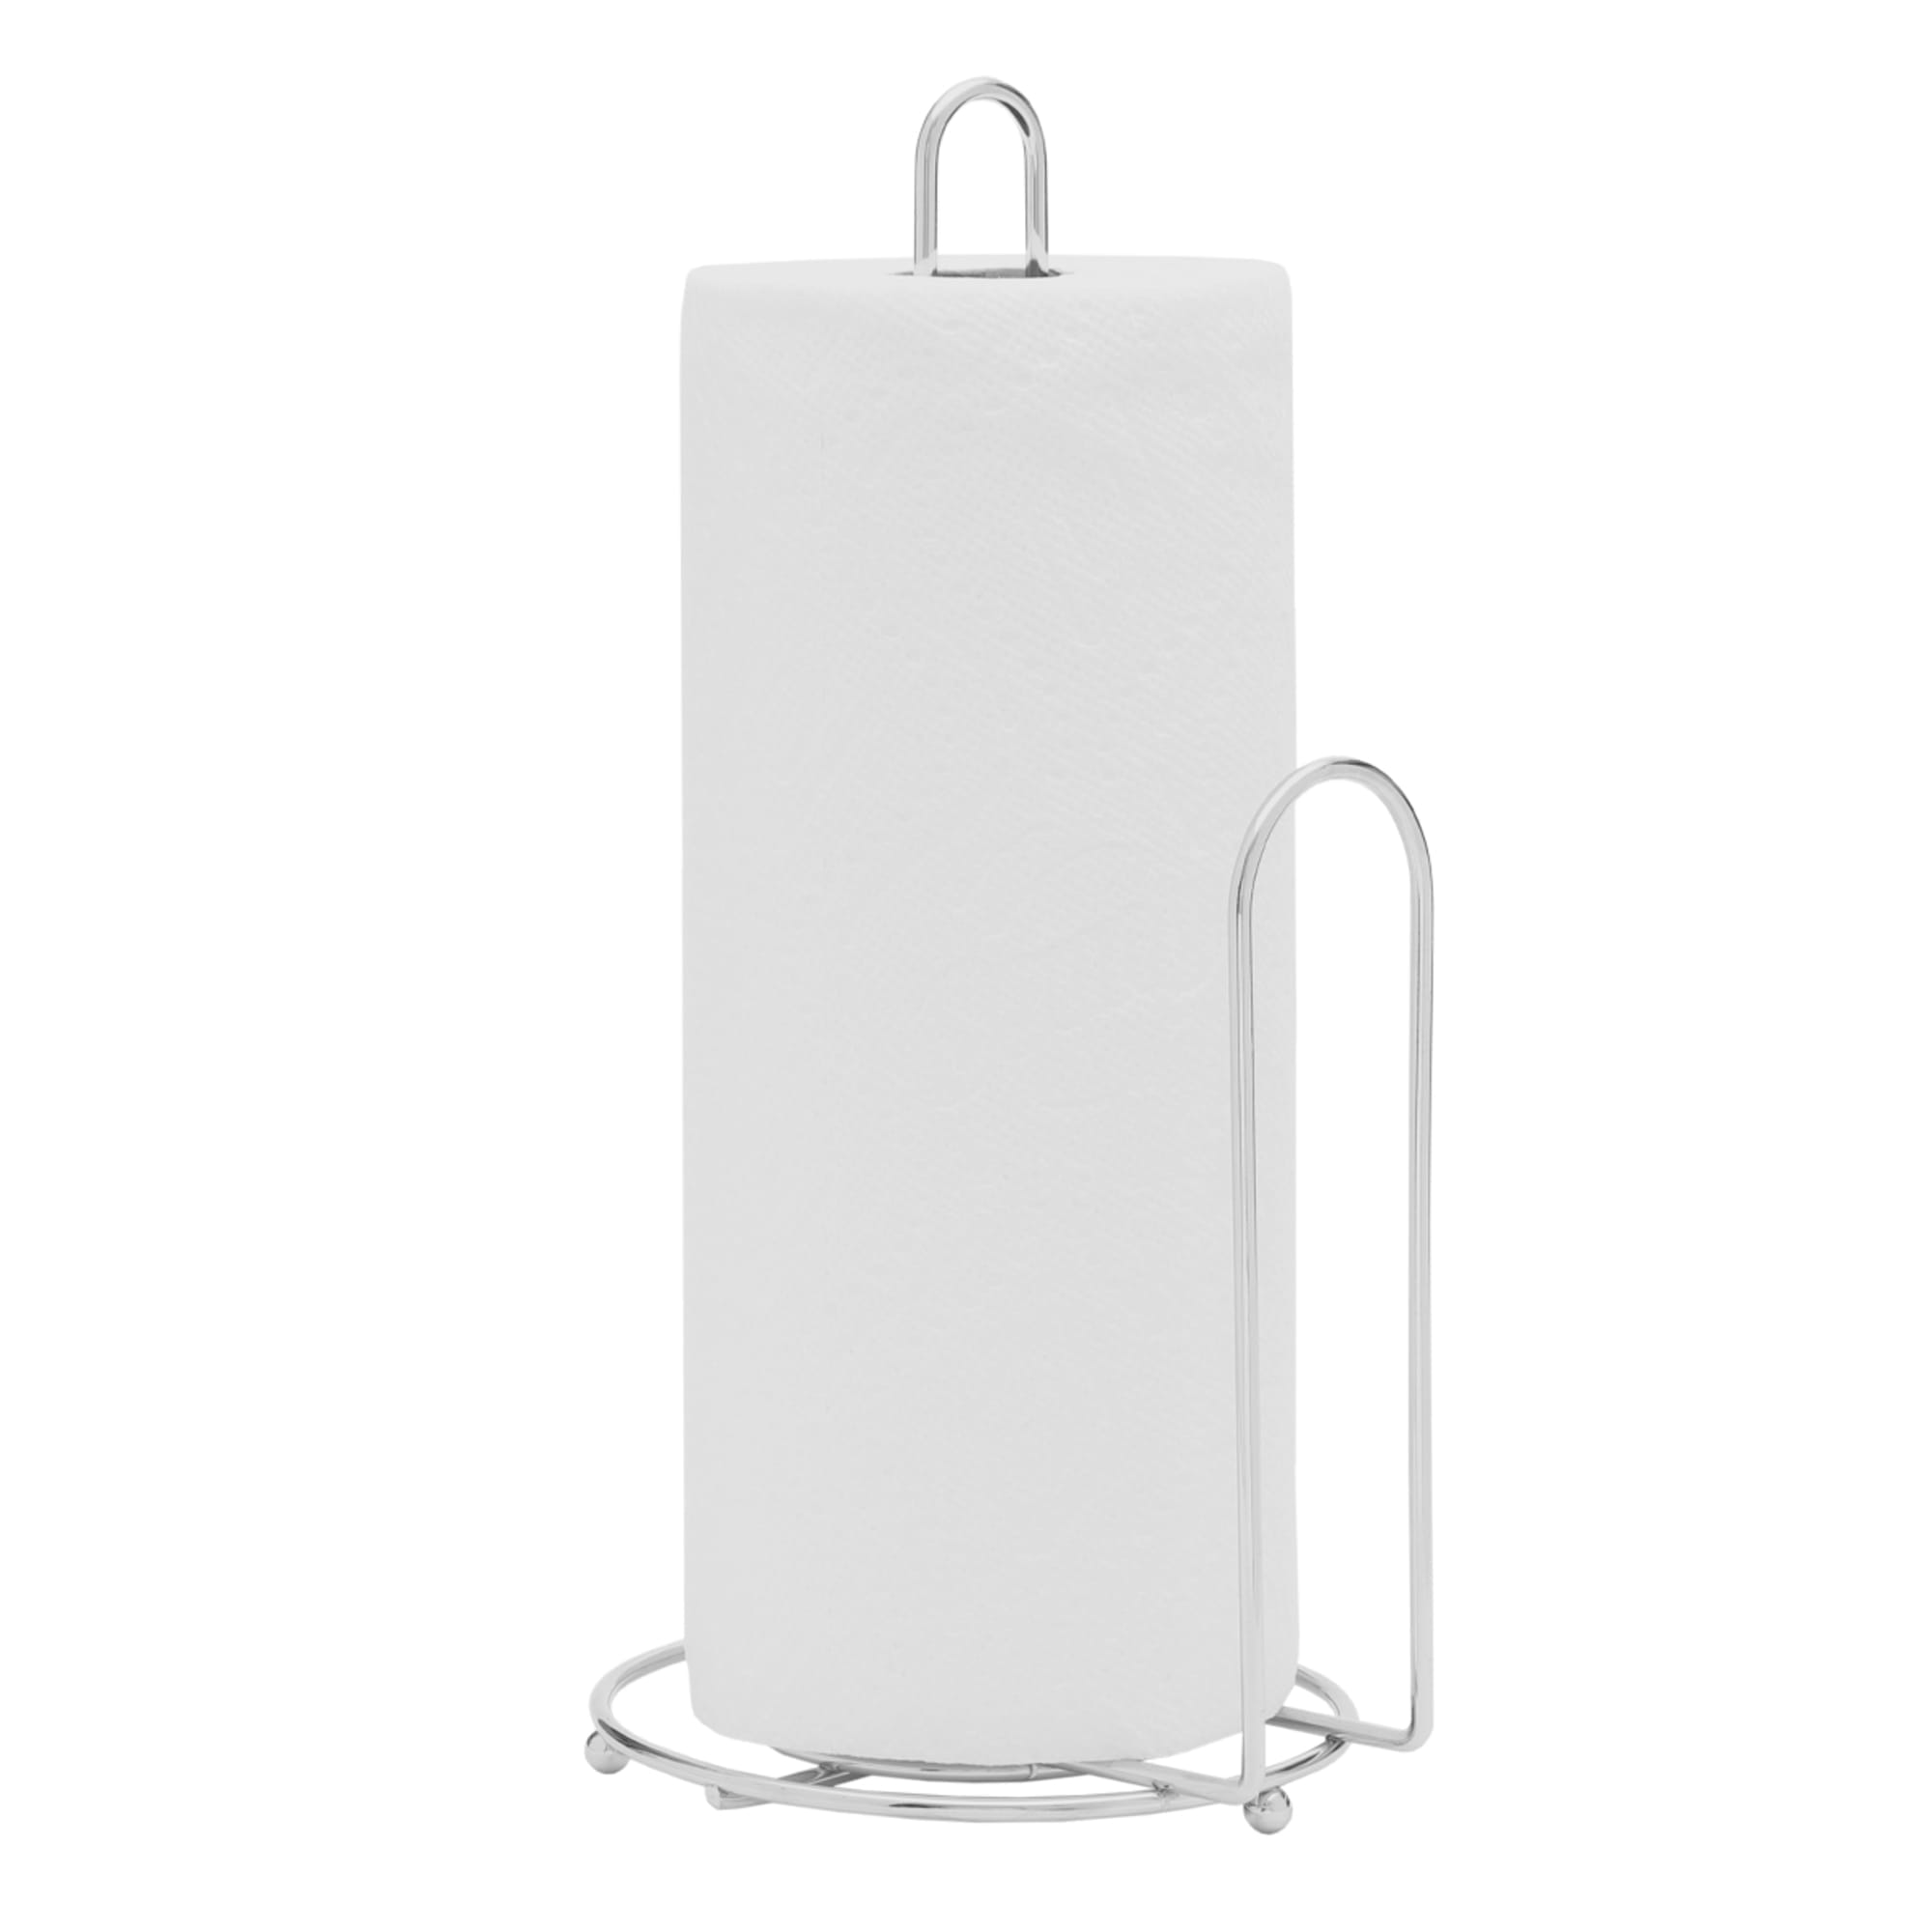 Home Basics Simplicity Collection Paper Towel Holder, Satin Chrome